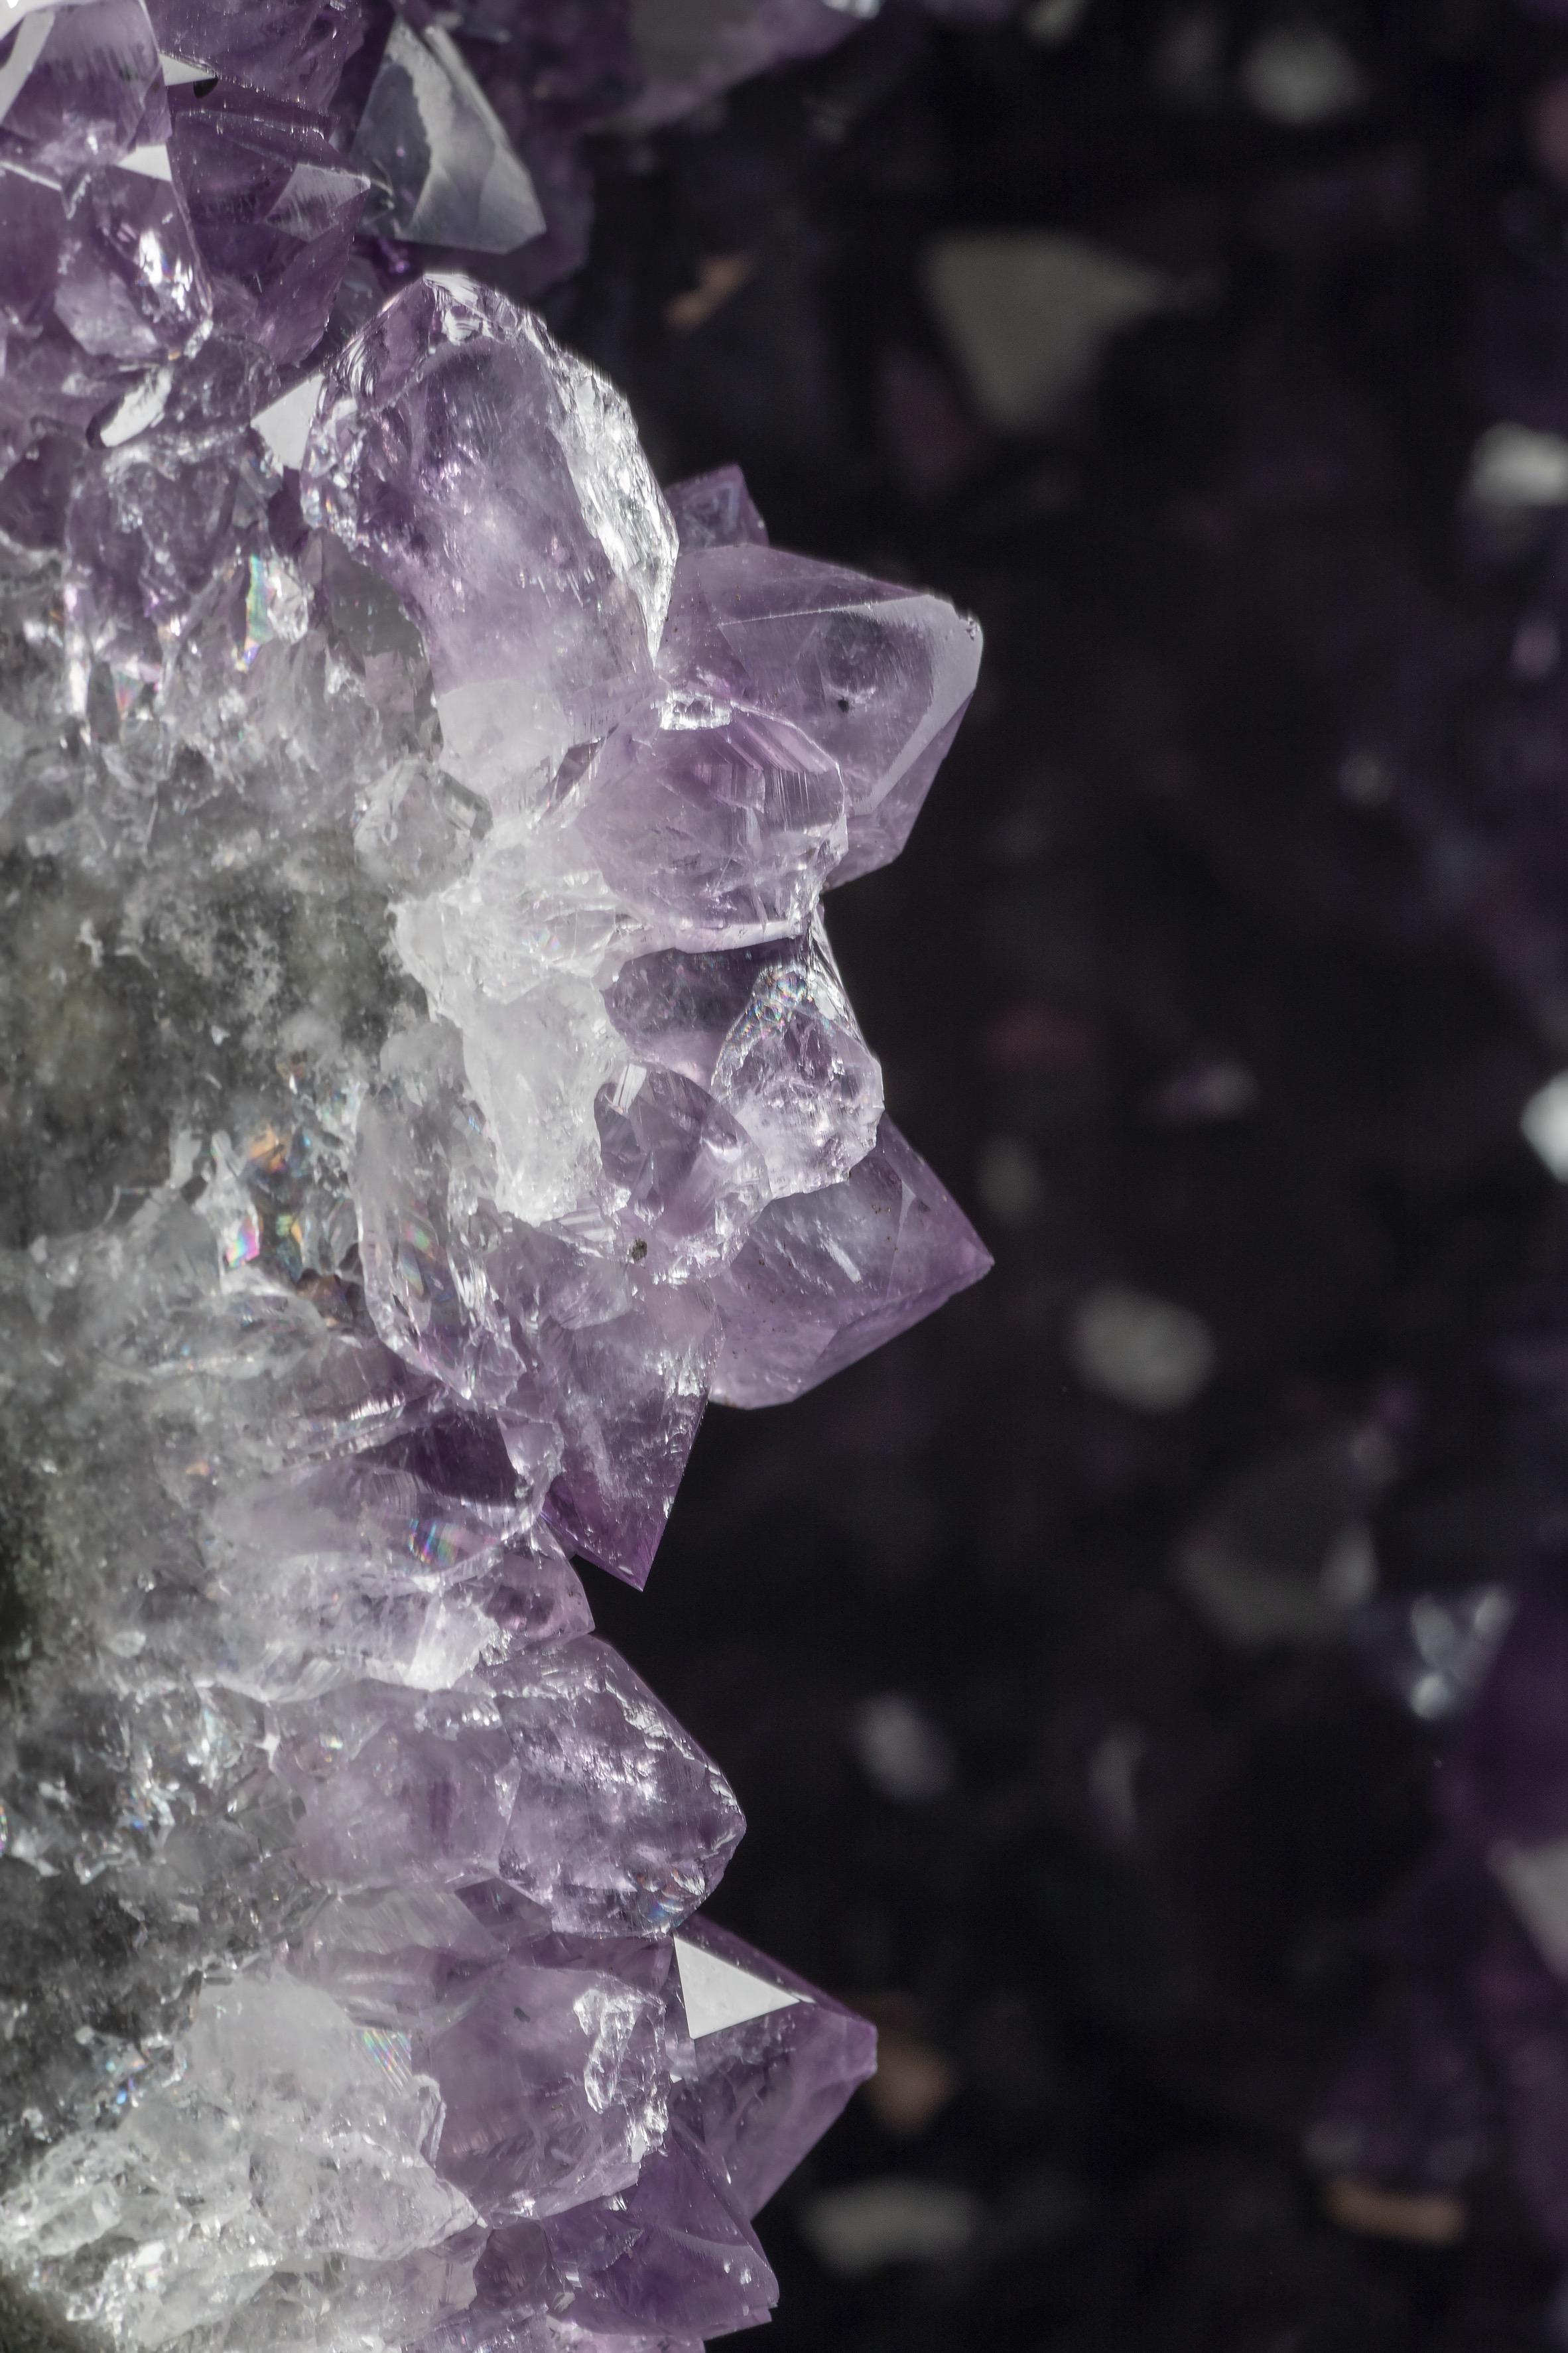 18th Century and Earlier High Quality Half Amethyst Geode with Calcite Formation For Sale